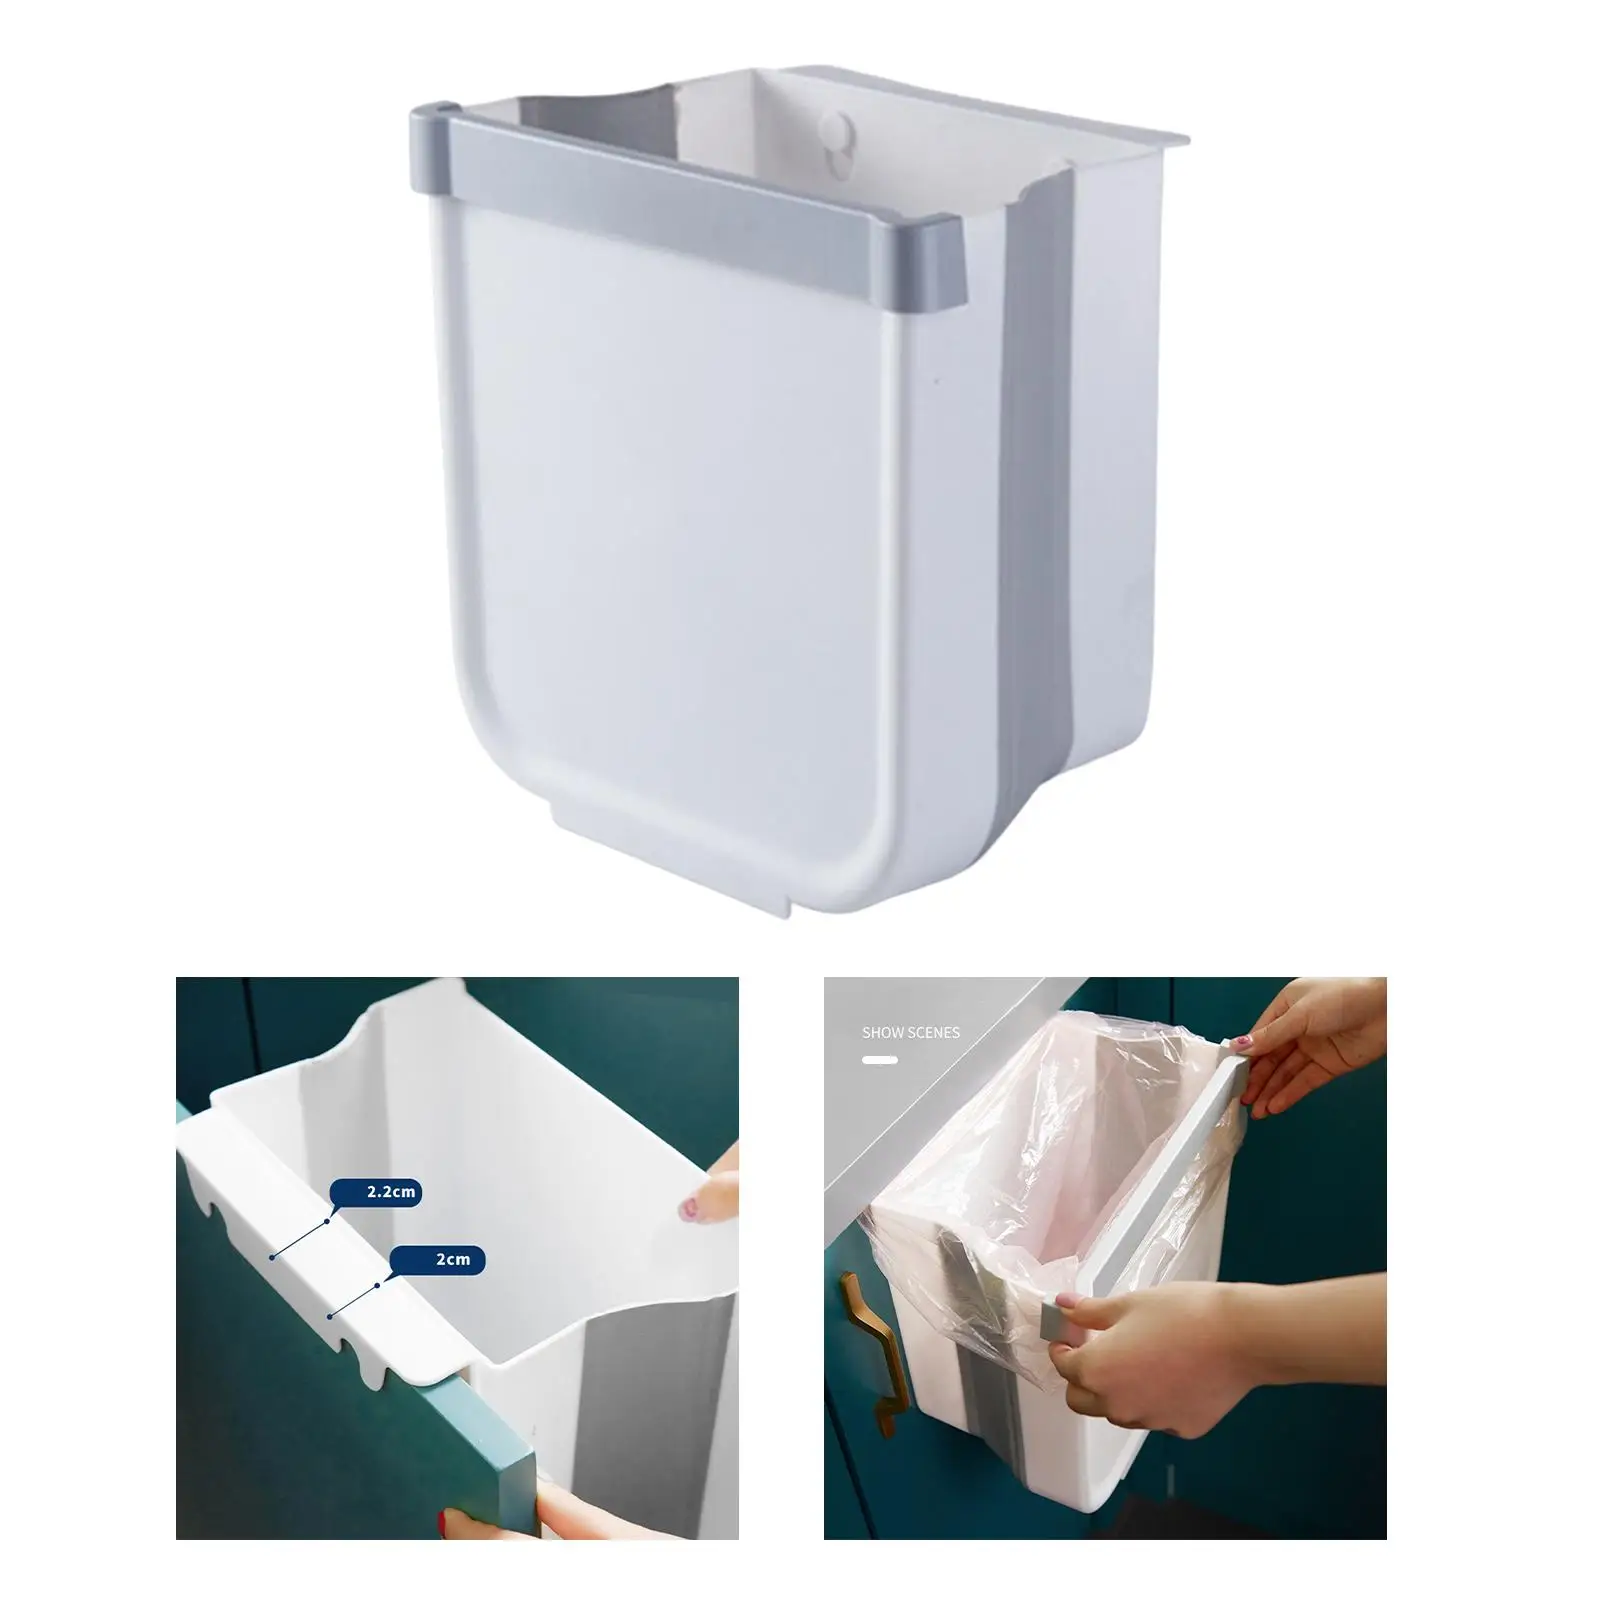 Kitchen Wall Mounted Trash Can Small Hanging Rectangular Garbage Bin Dustbin for Kitchen Cabinet Cupboard Wall Bathroom Laundry